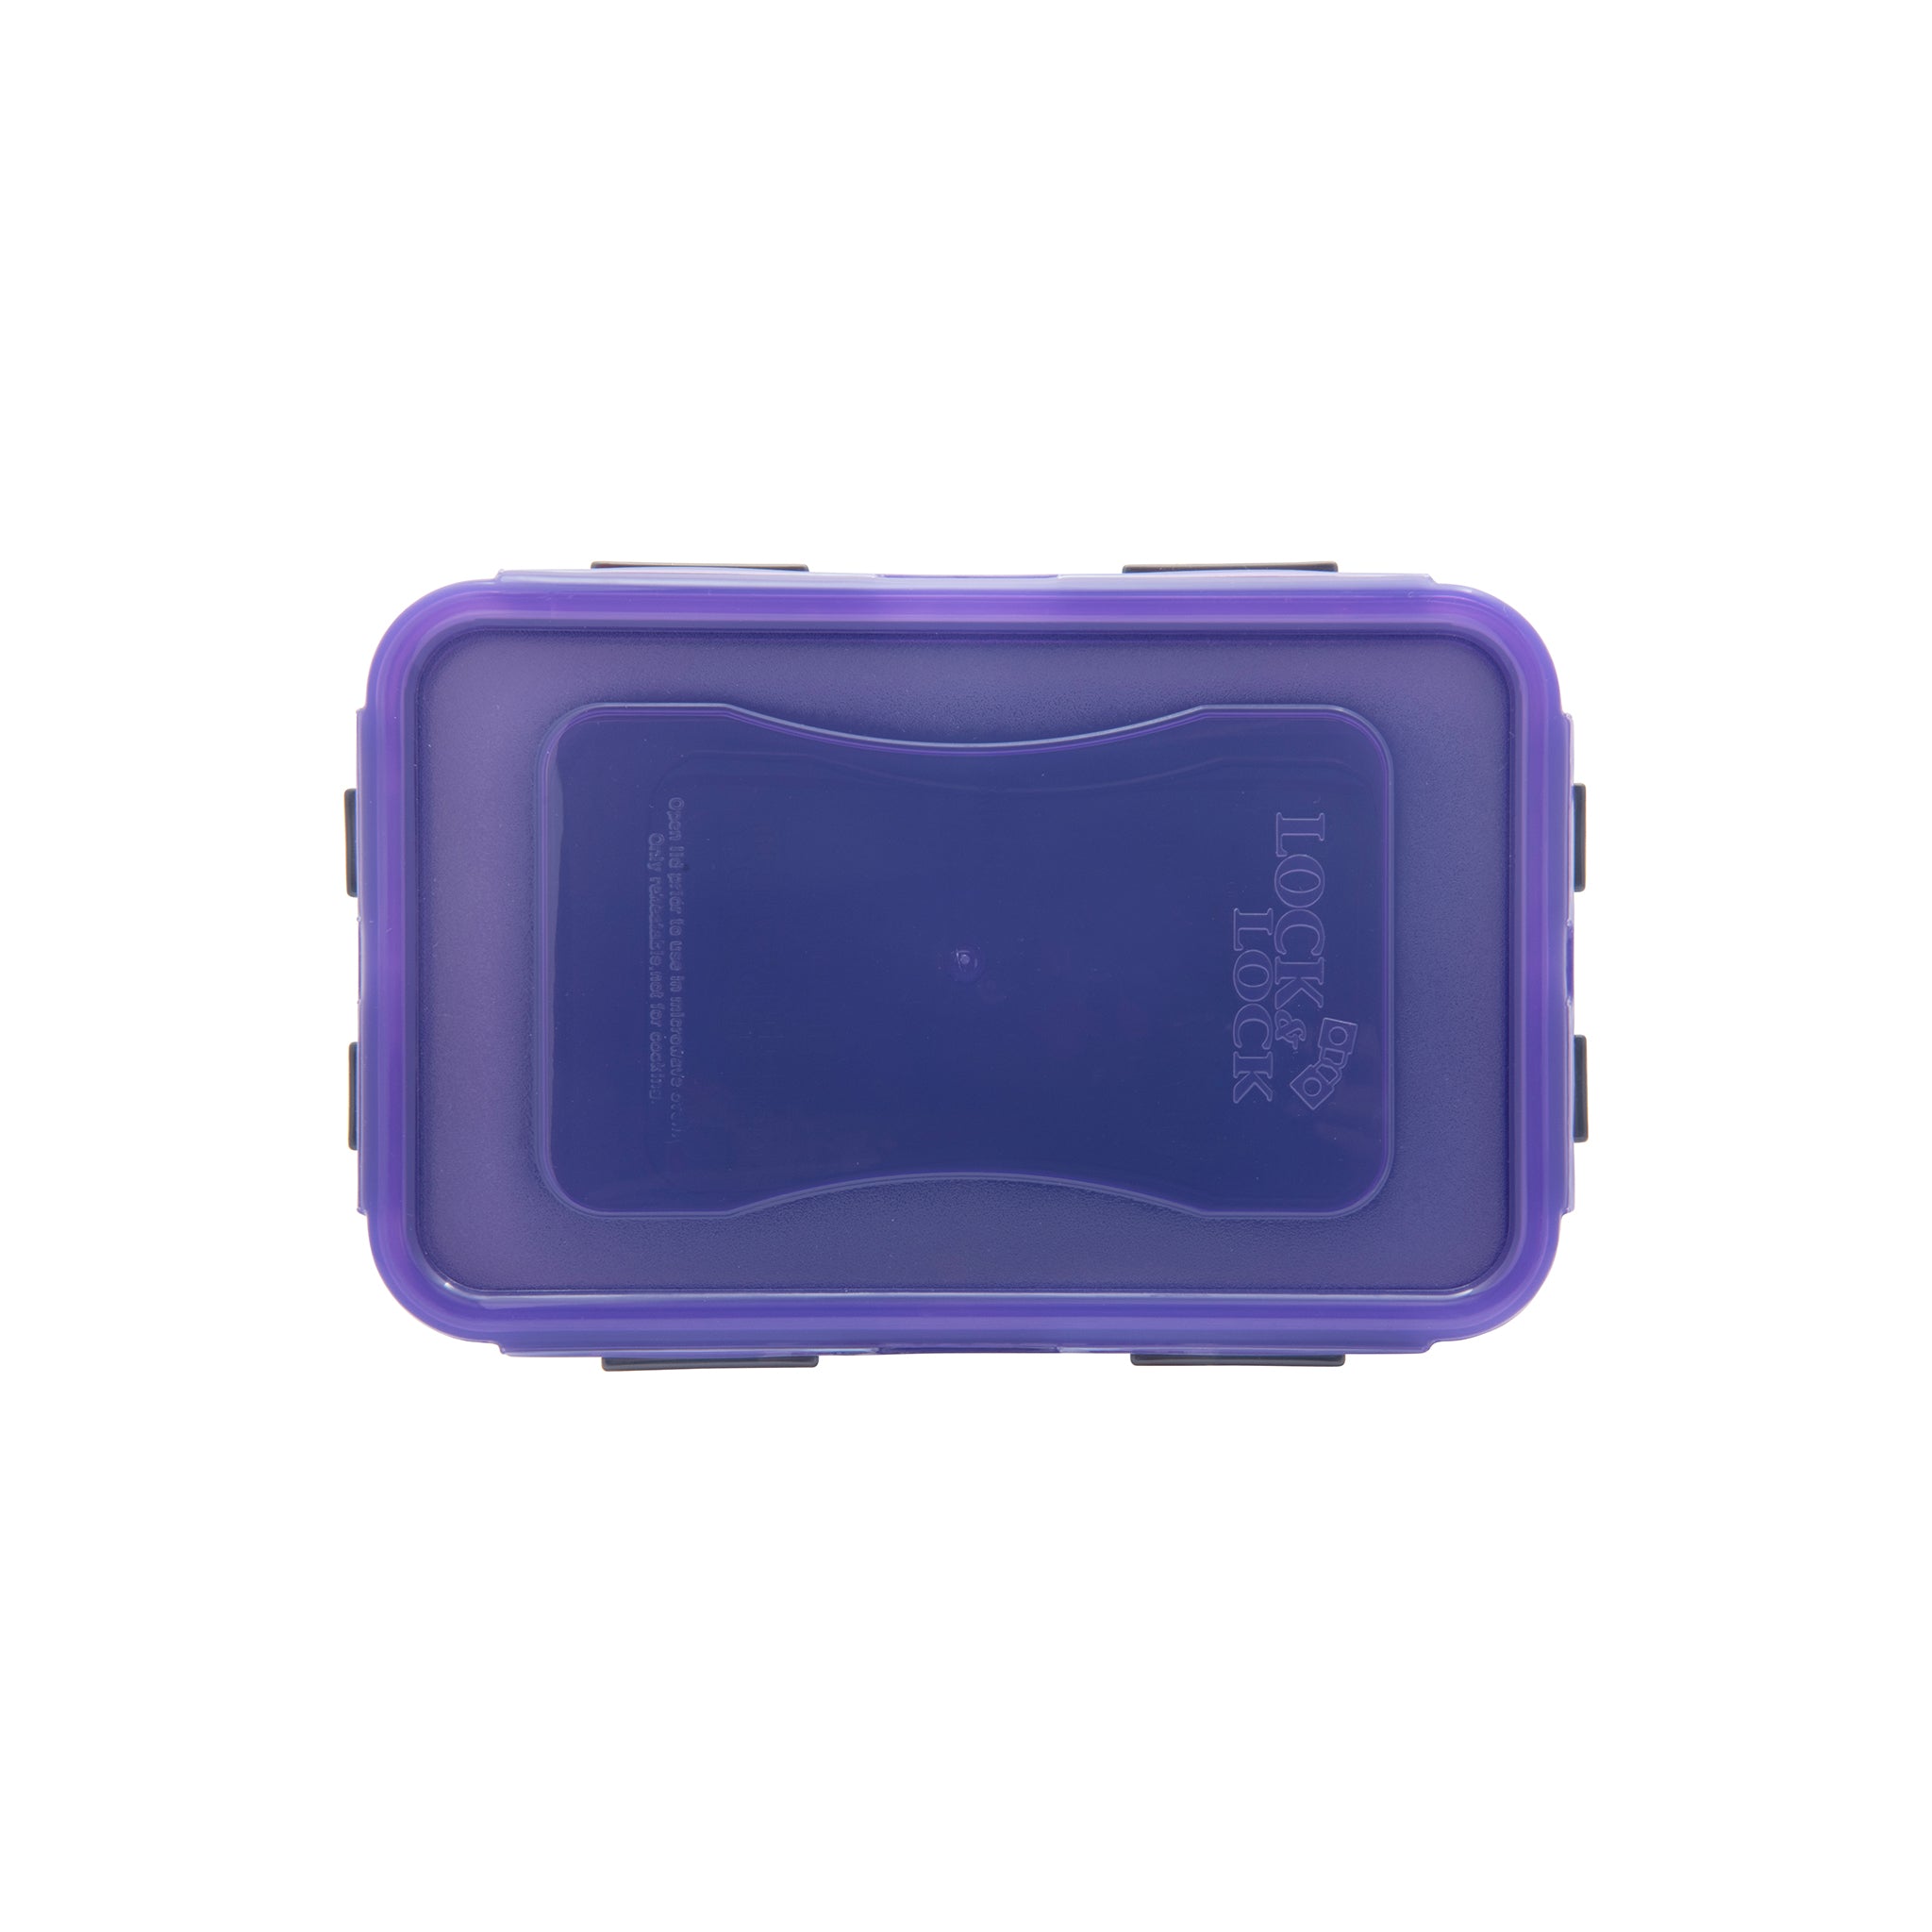 Lock & Lock recycled plastic food container from top with a white background